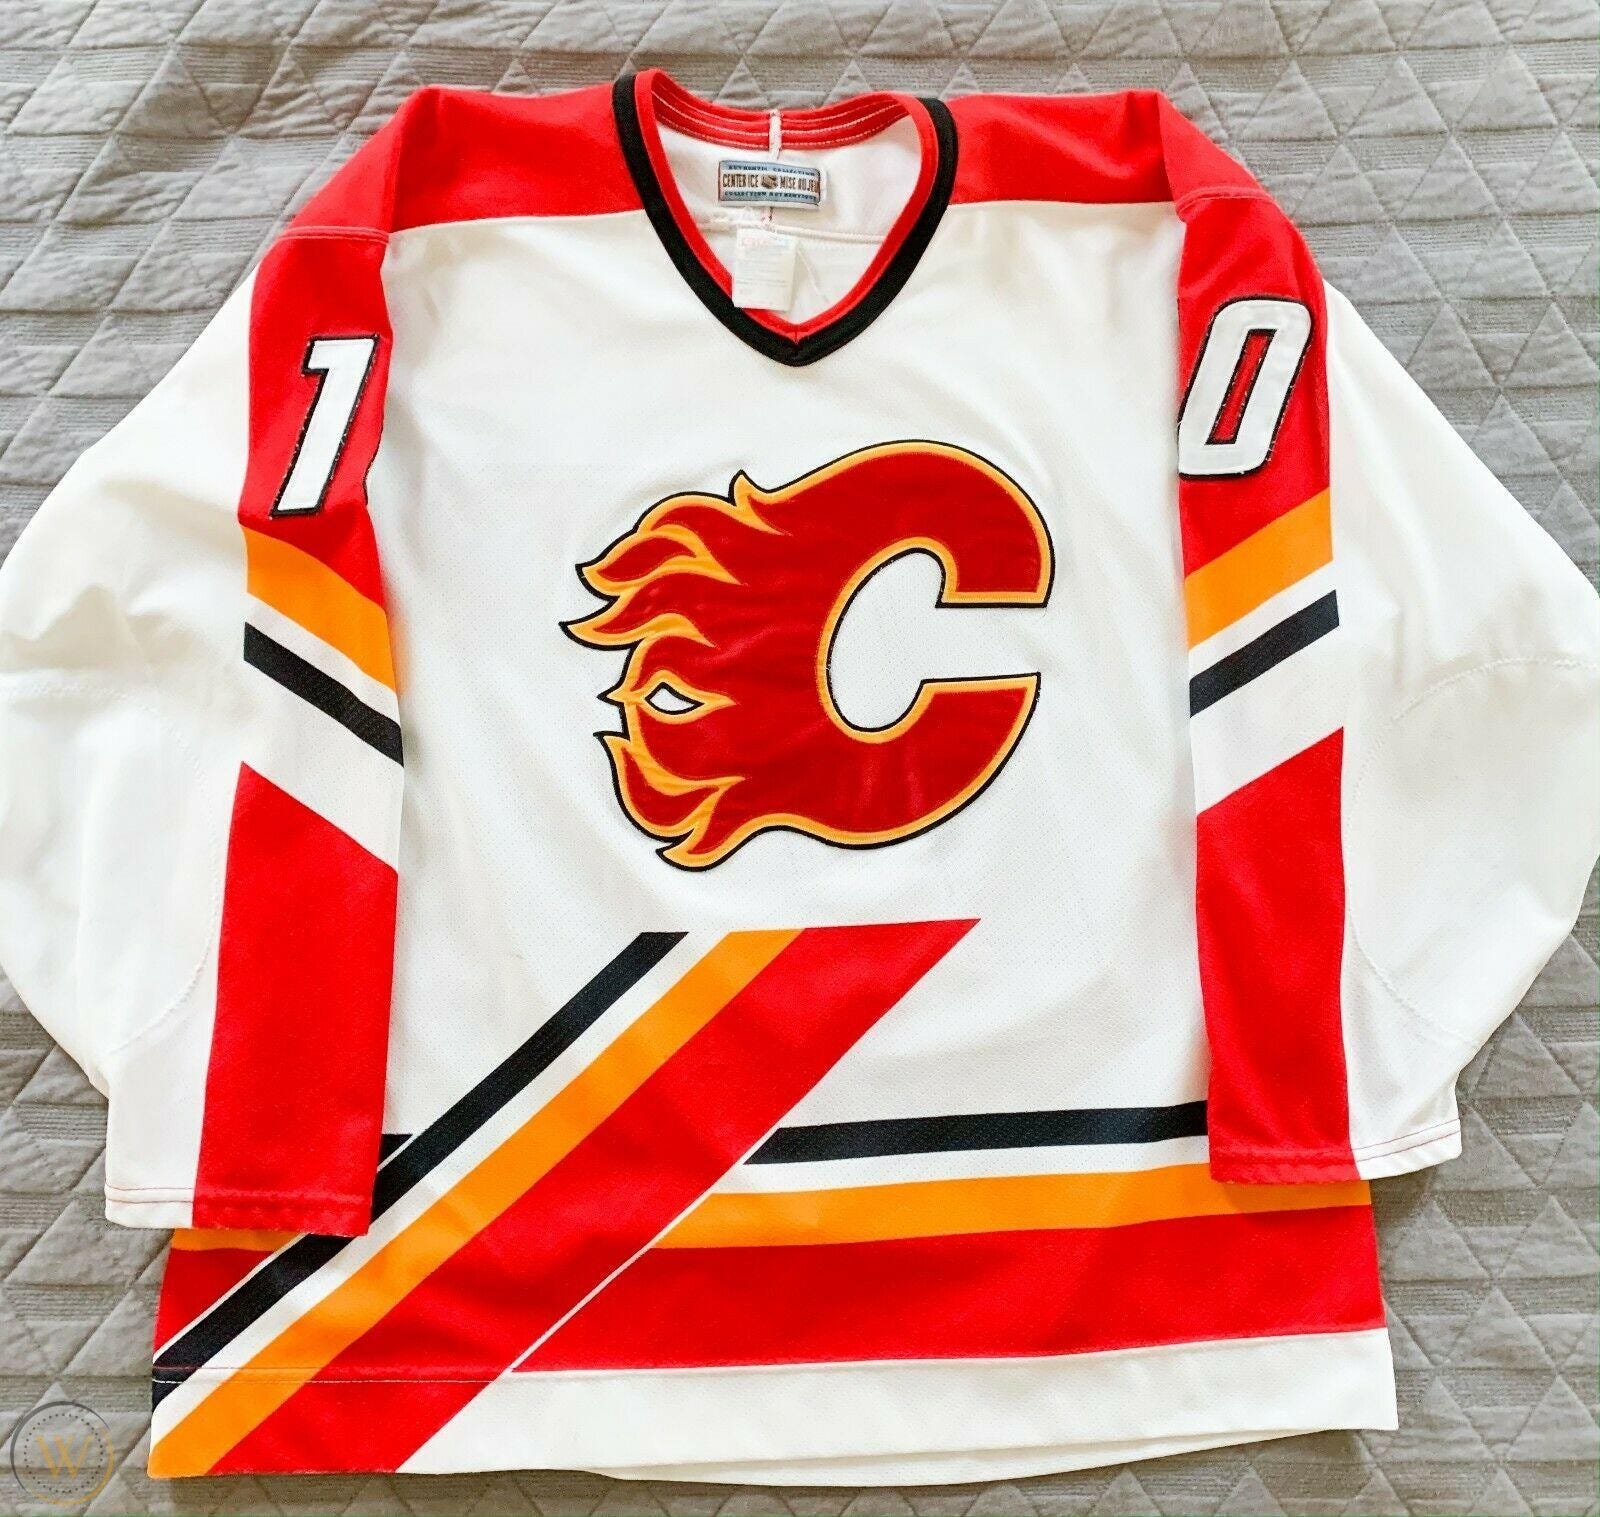 The highly requested red pedestal jerseys! : r/CalgaryFlames